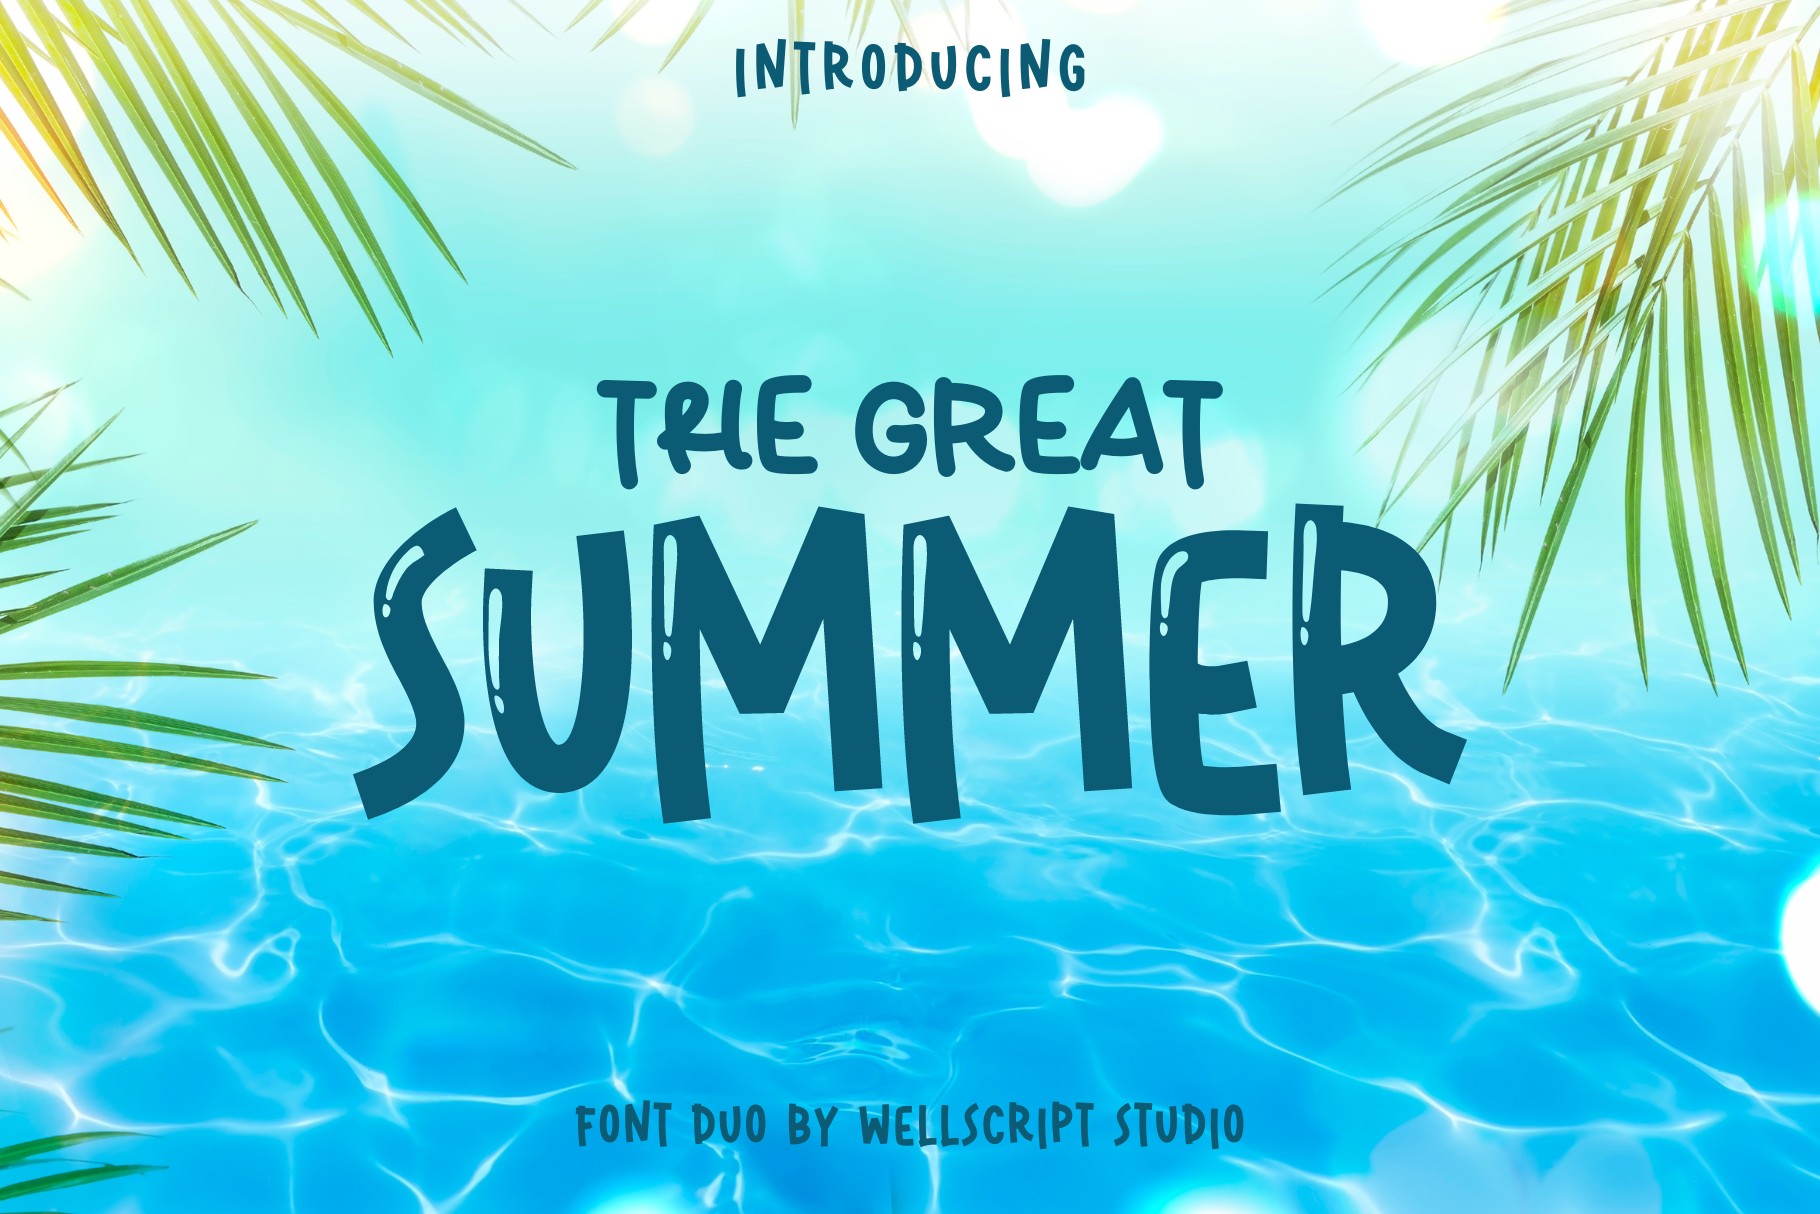 The Great Summer